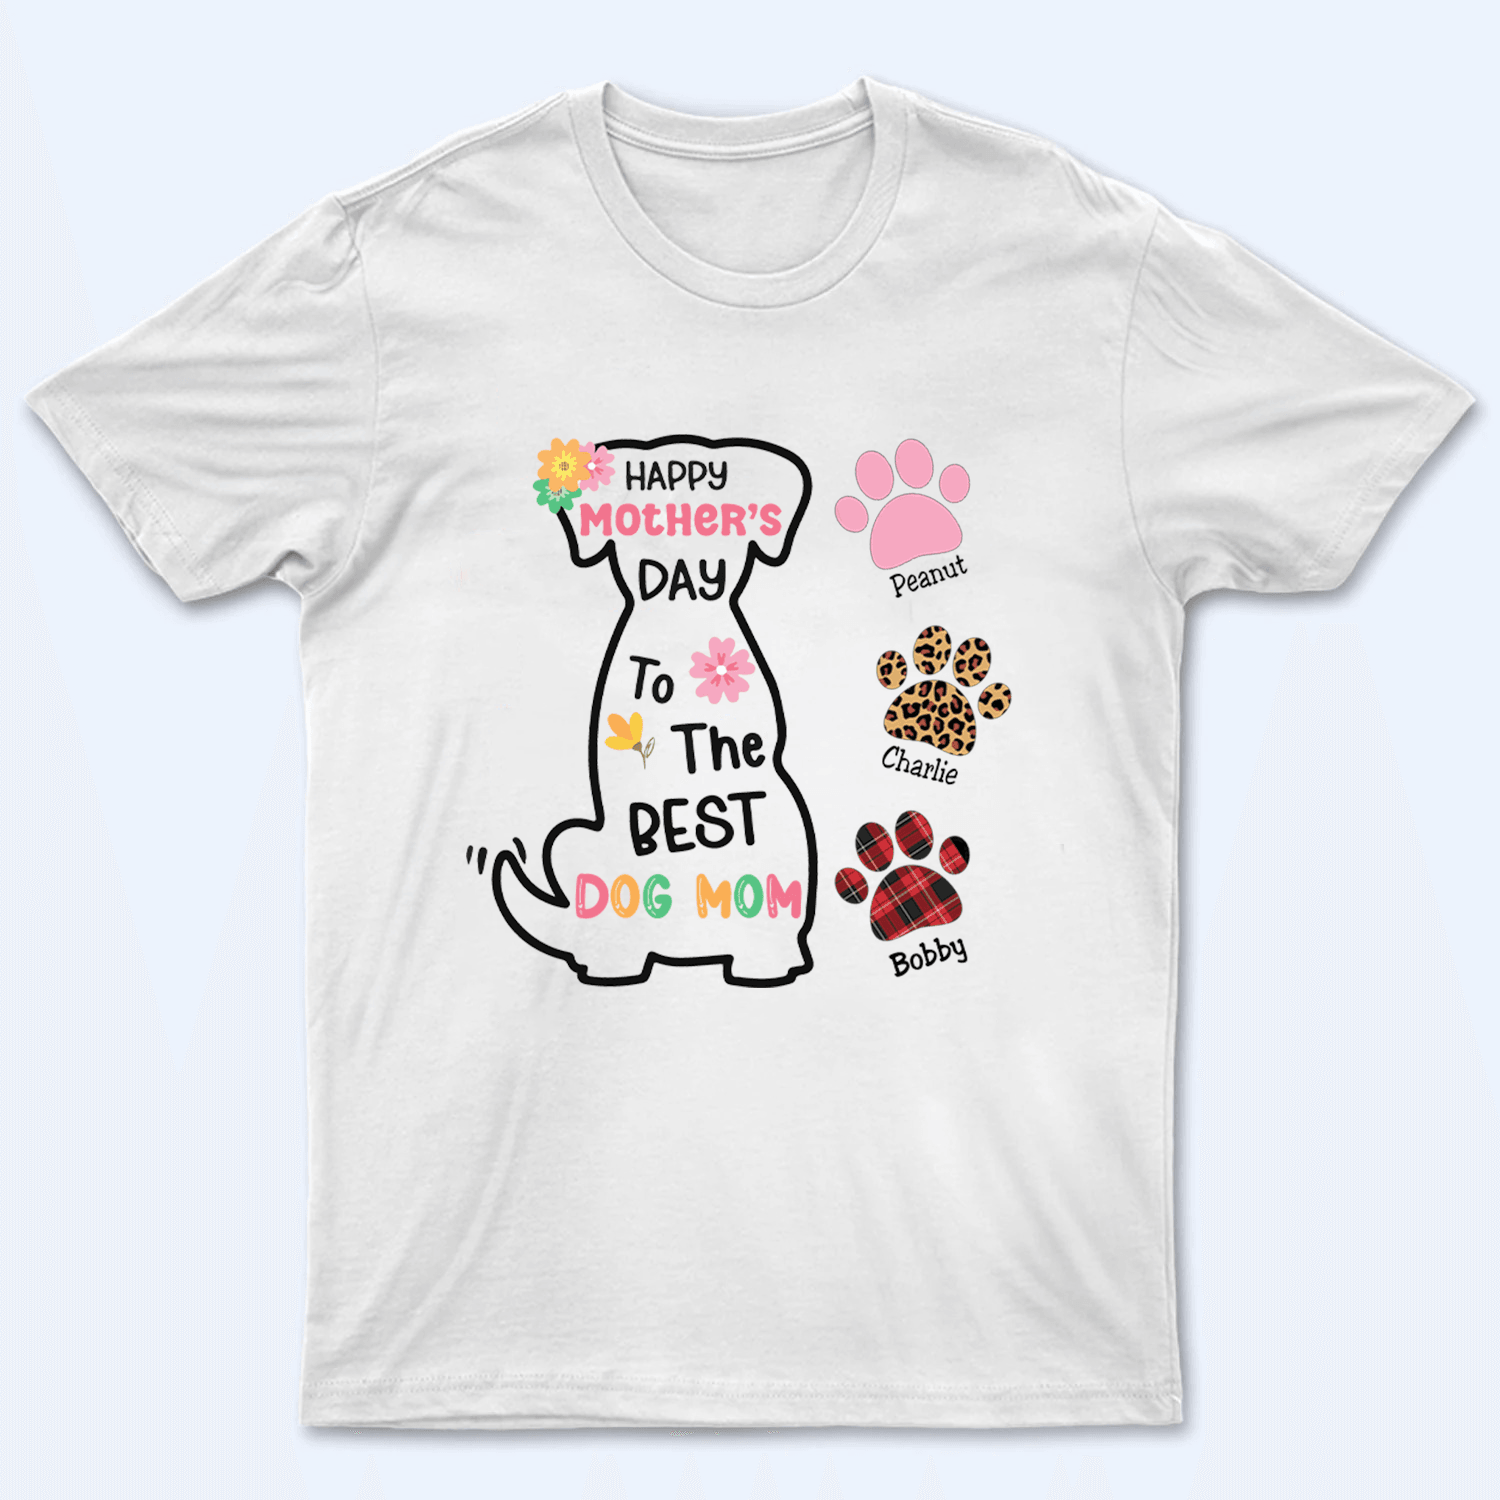 Happy Mother's Day To The Best Dog Mom - Personalized Custom T Shirt - Birthday, Loving, Funny Gift for Dog Mom, Dog Lovers, Pet Gifts for Mother's Day - Suzitee Store